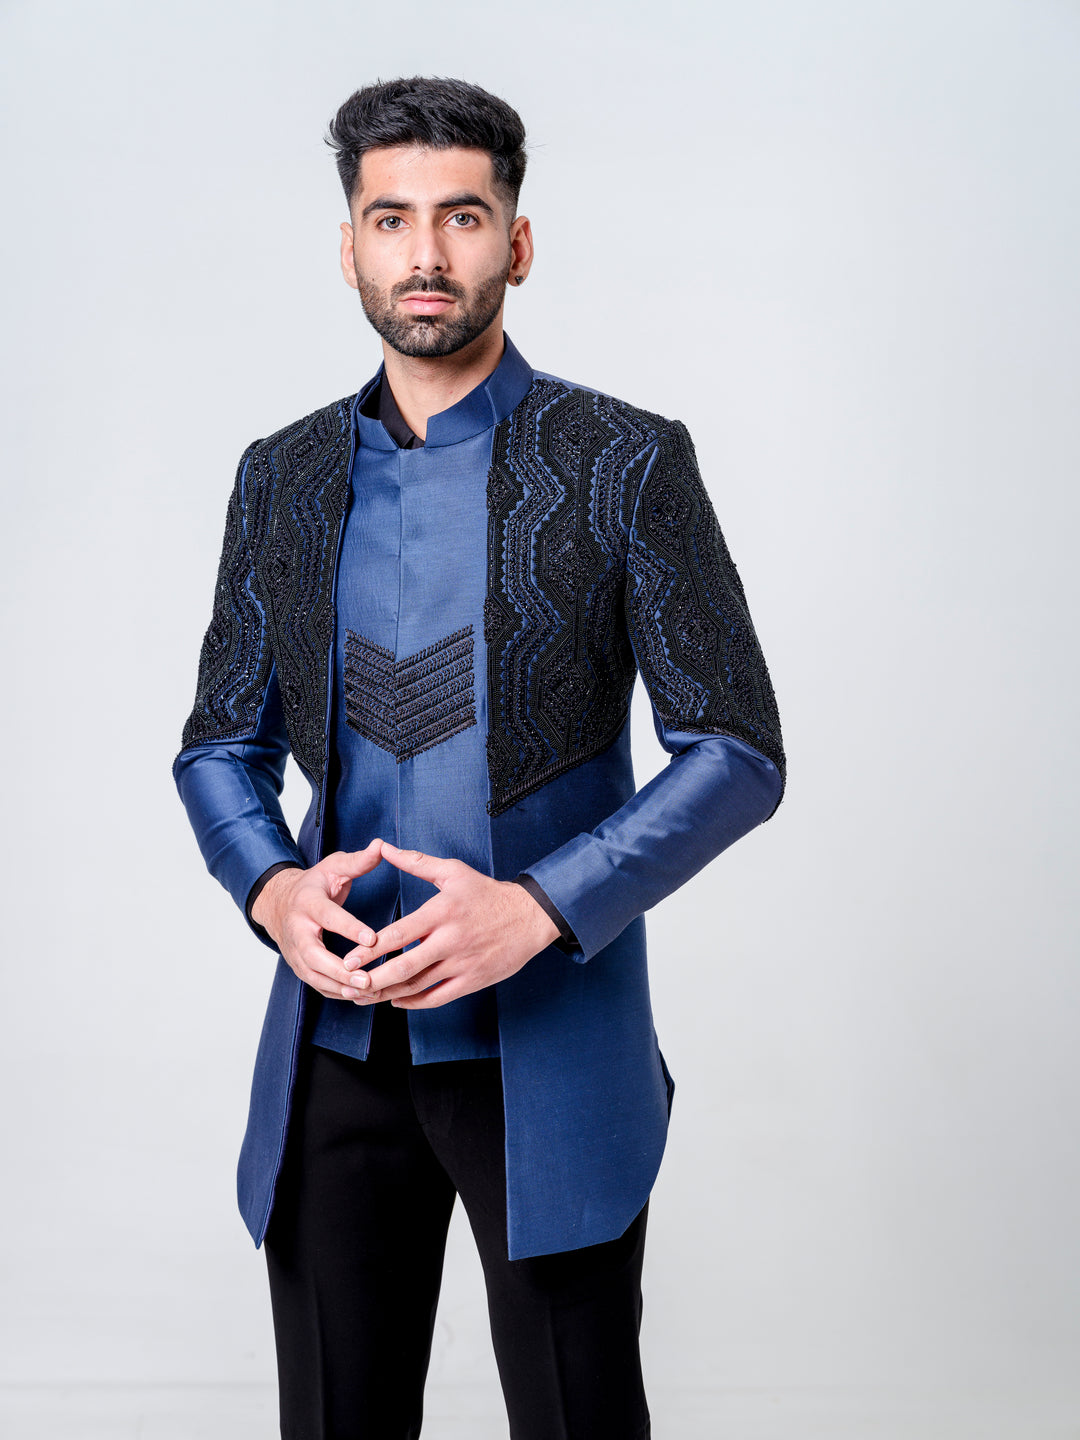 LONG OPEN JACKET ATTACHED NEHRU JACKET PAIRED WITH KURTA AND TROUSERS